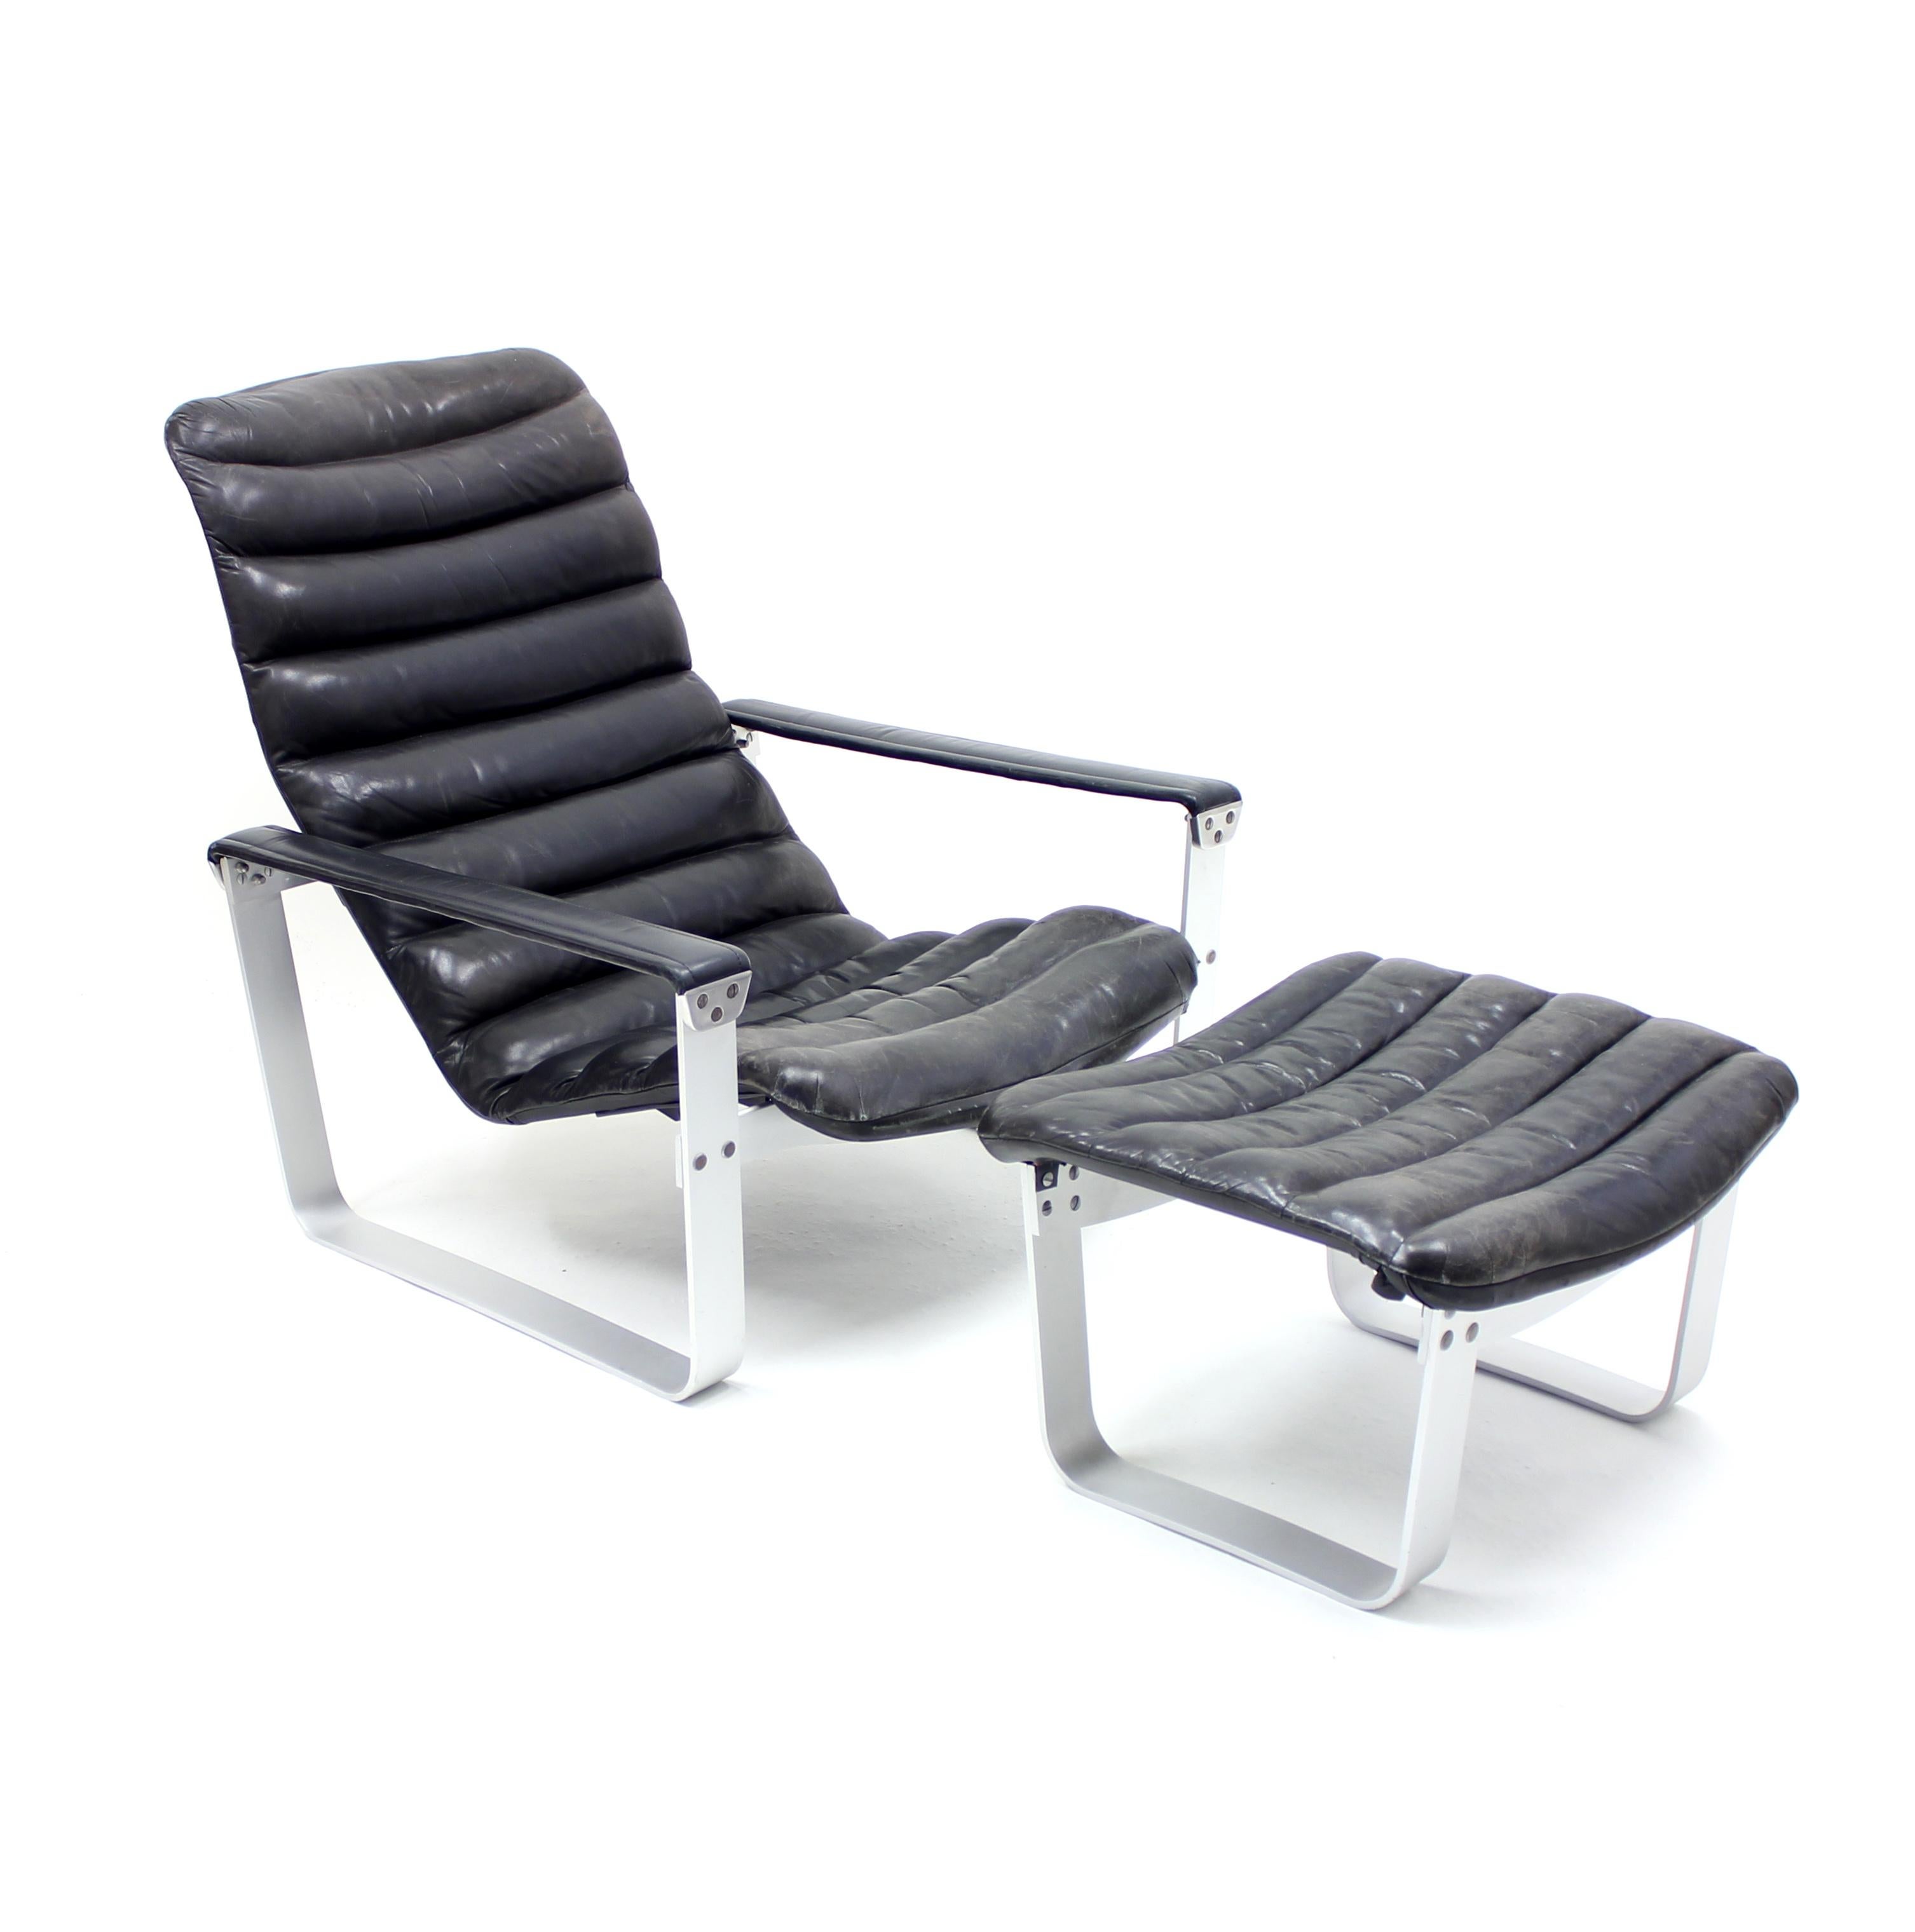 Adjustable lounge chair, model Pulkka, by Ilmari Lappalainen for ASKO with ottoman in original black leather and aluminium. Designed in 1968. The seat can be adjusted in three different positions. Faded ASKO sticker under ottoman. Very good vintage